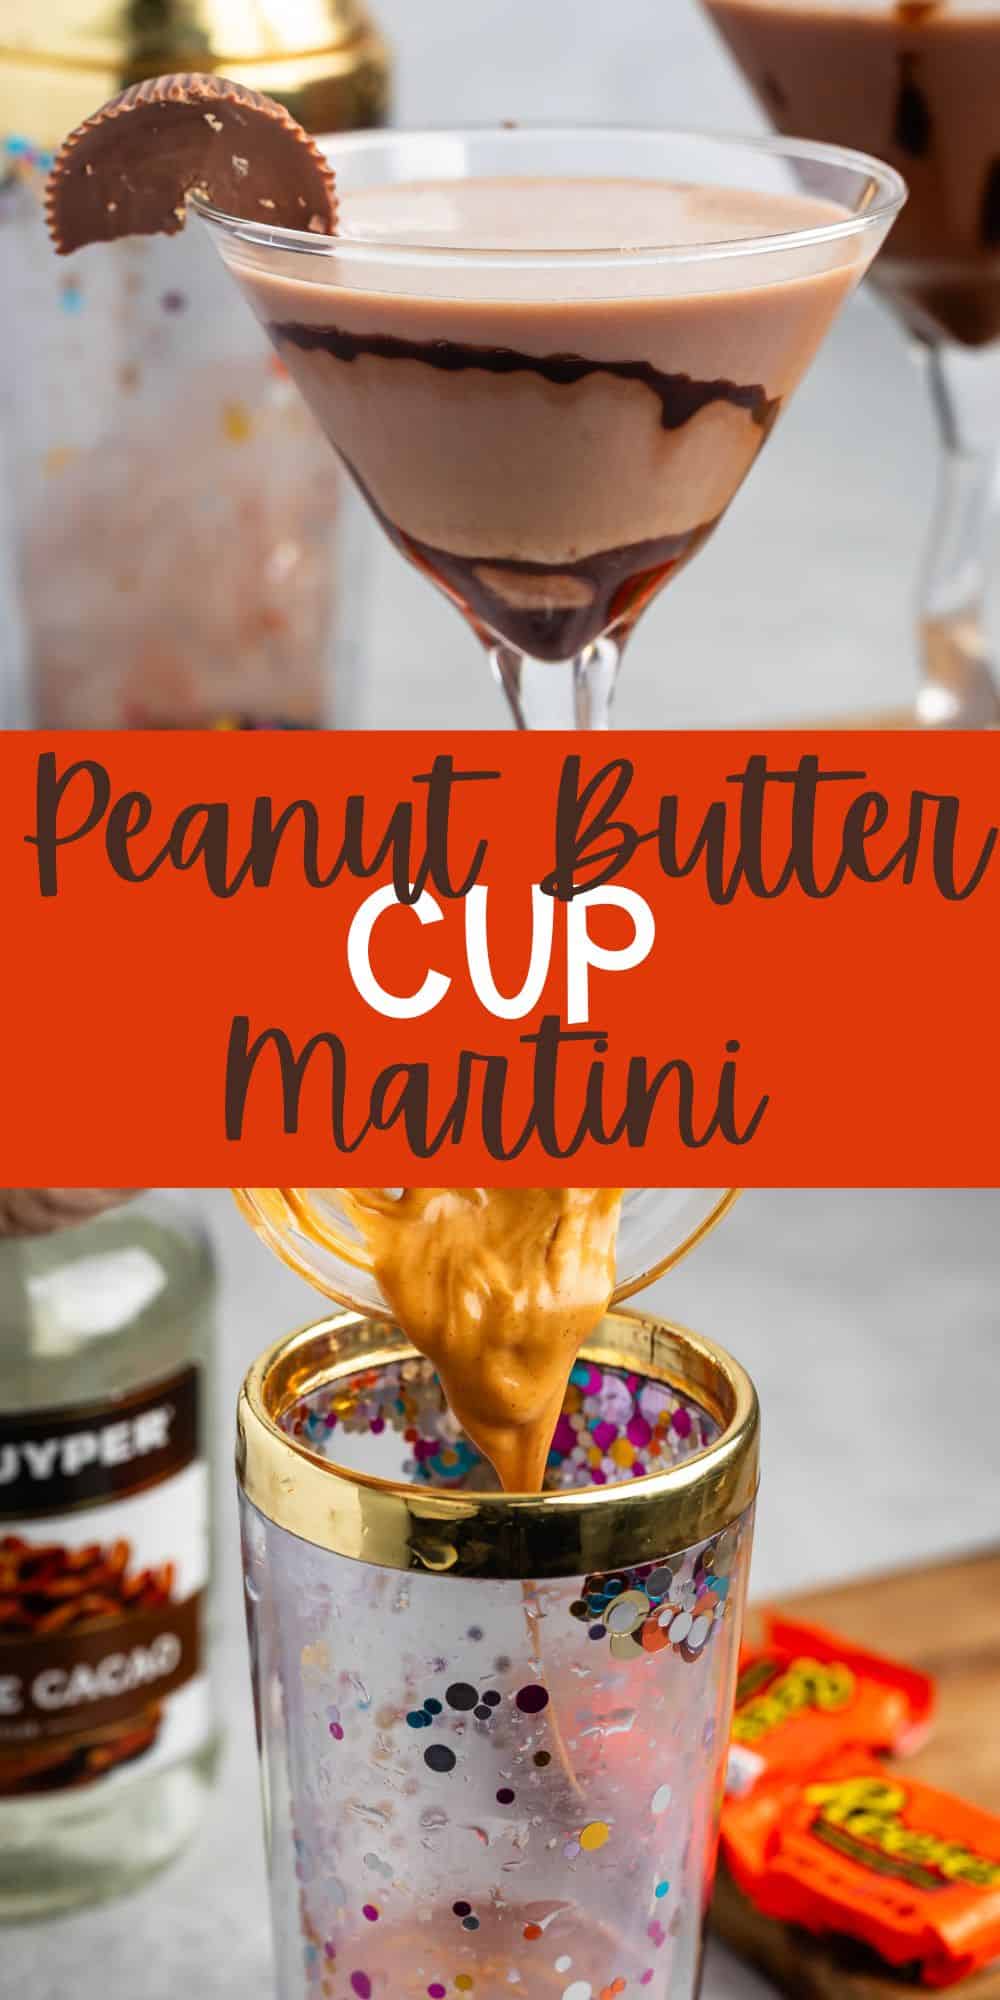 two photos of peanut butter martini in a clear tall glass with a peanut butter cup on the rim with words on the image.